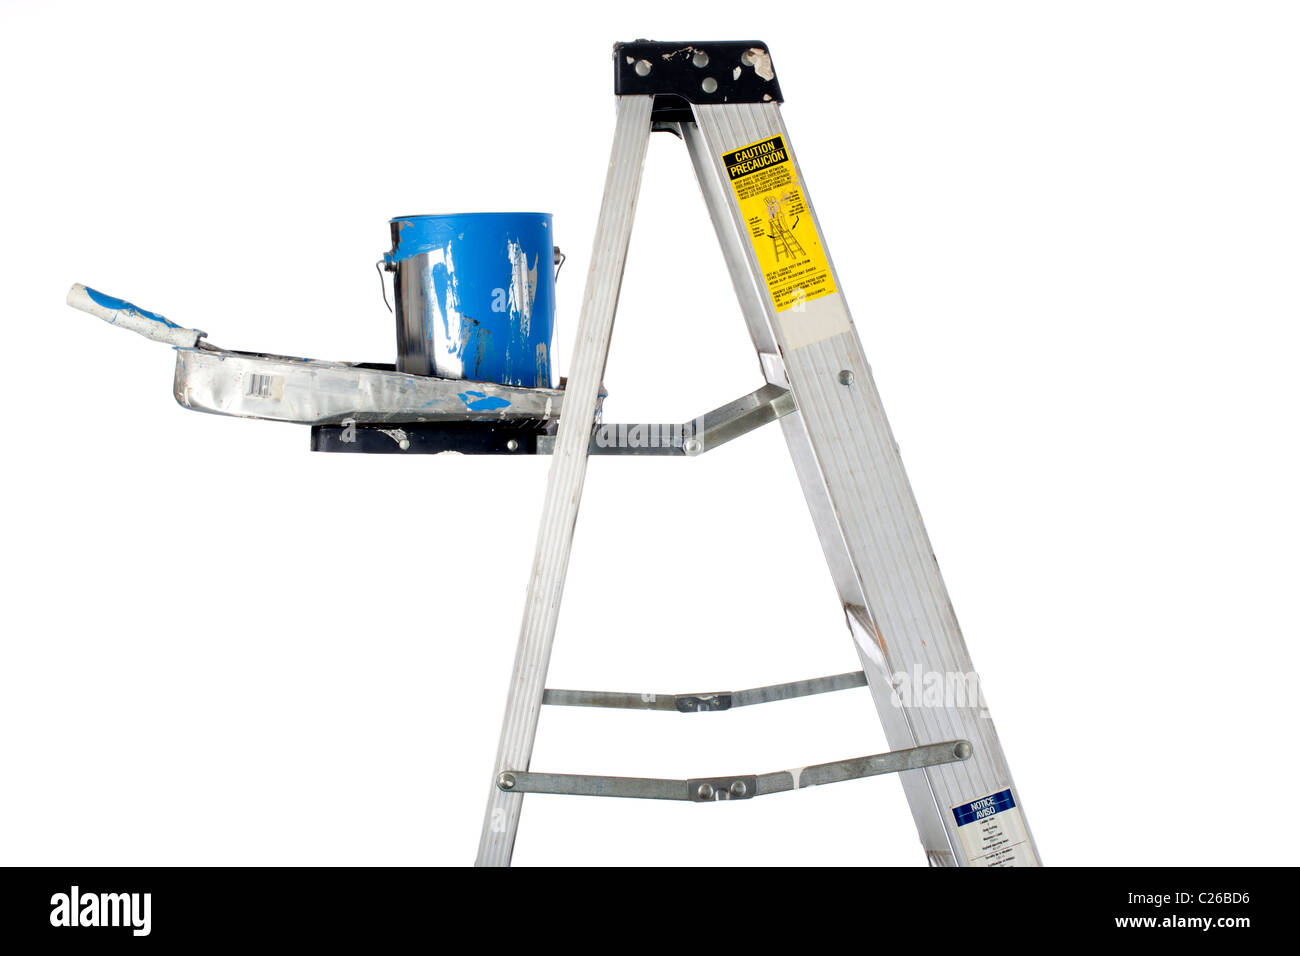 Horizontal image of a paint can, paint roller and tray on a ladder on white Stock Photo